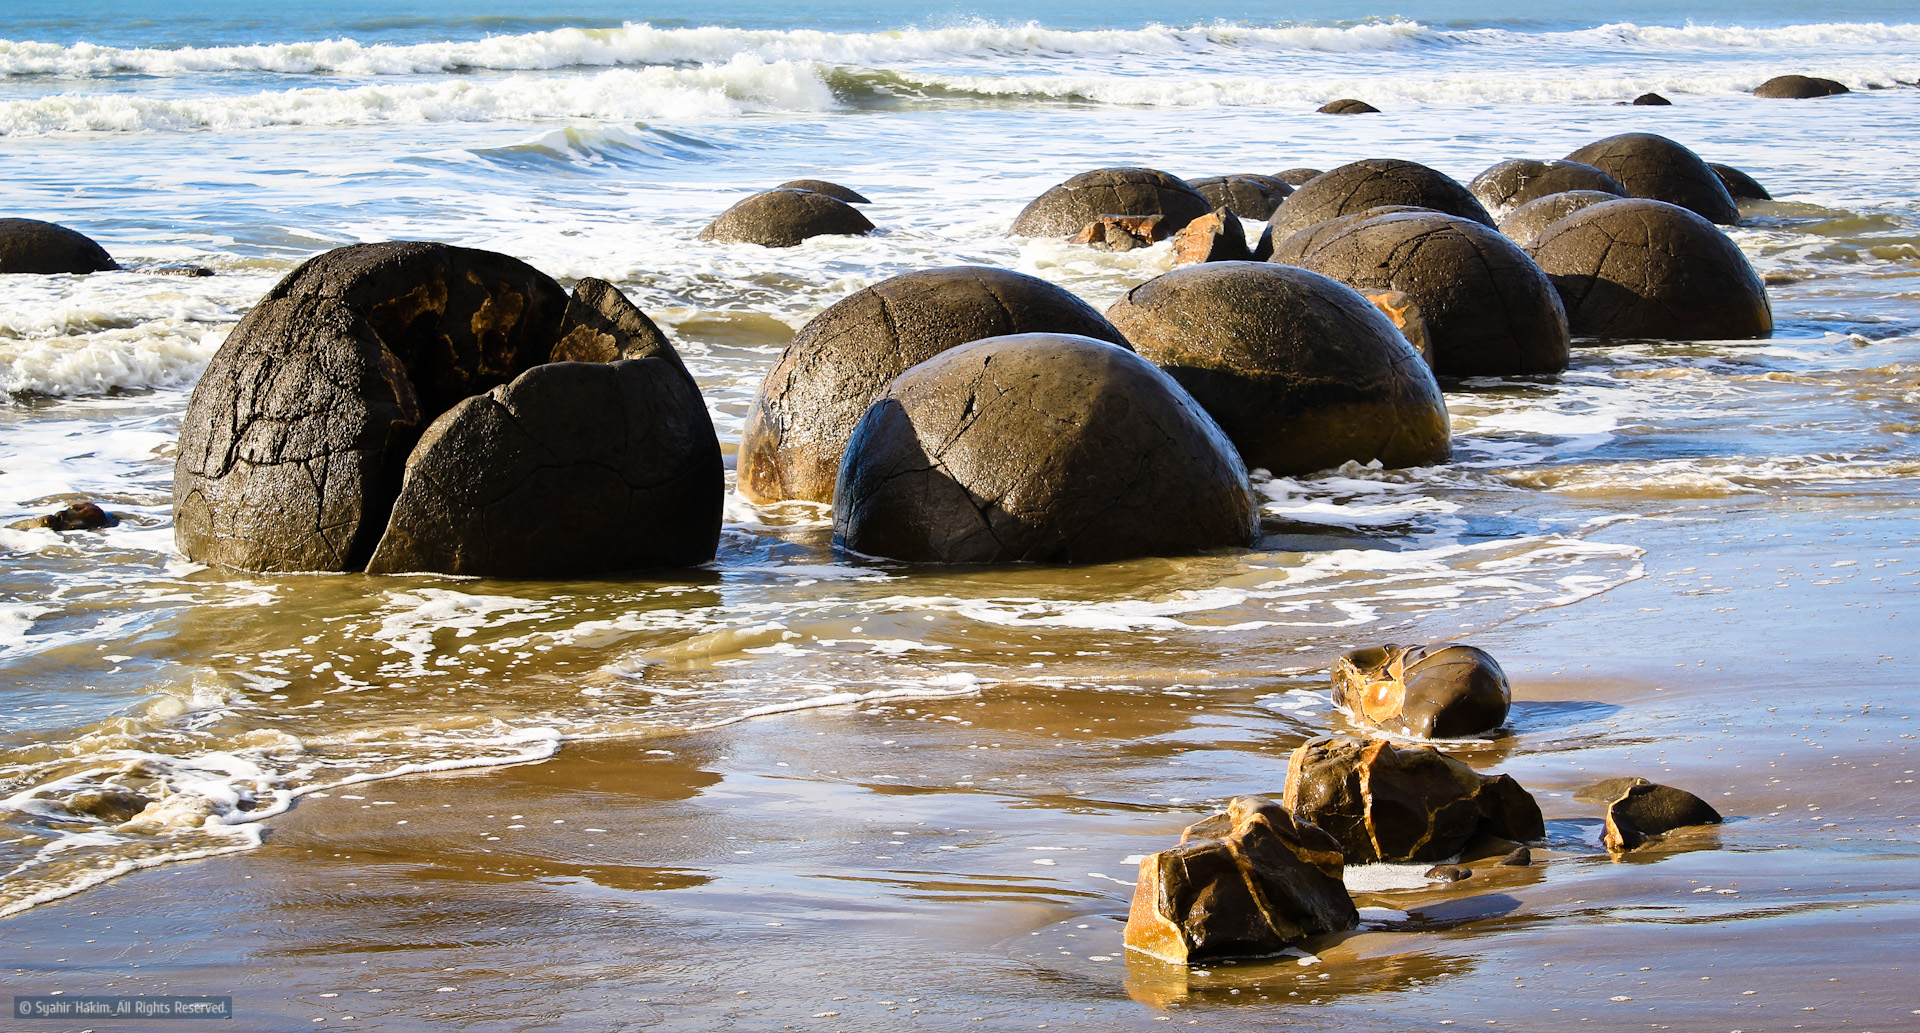 Most-Mythical-Places-in-the-World-Moeraki-Boulders